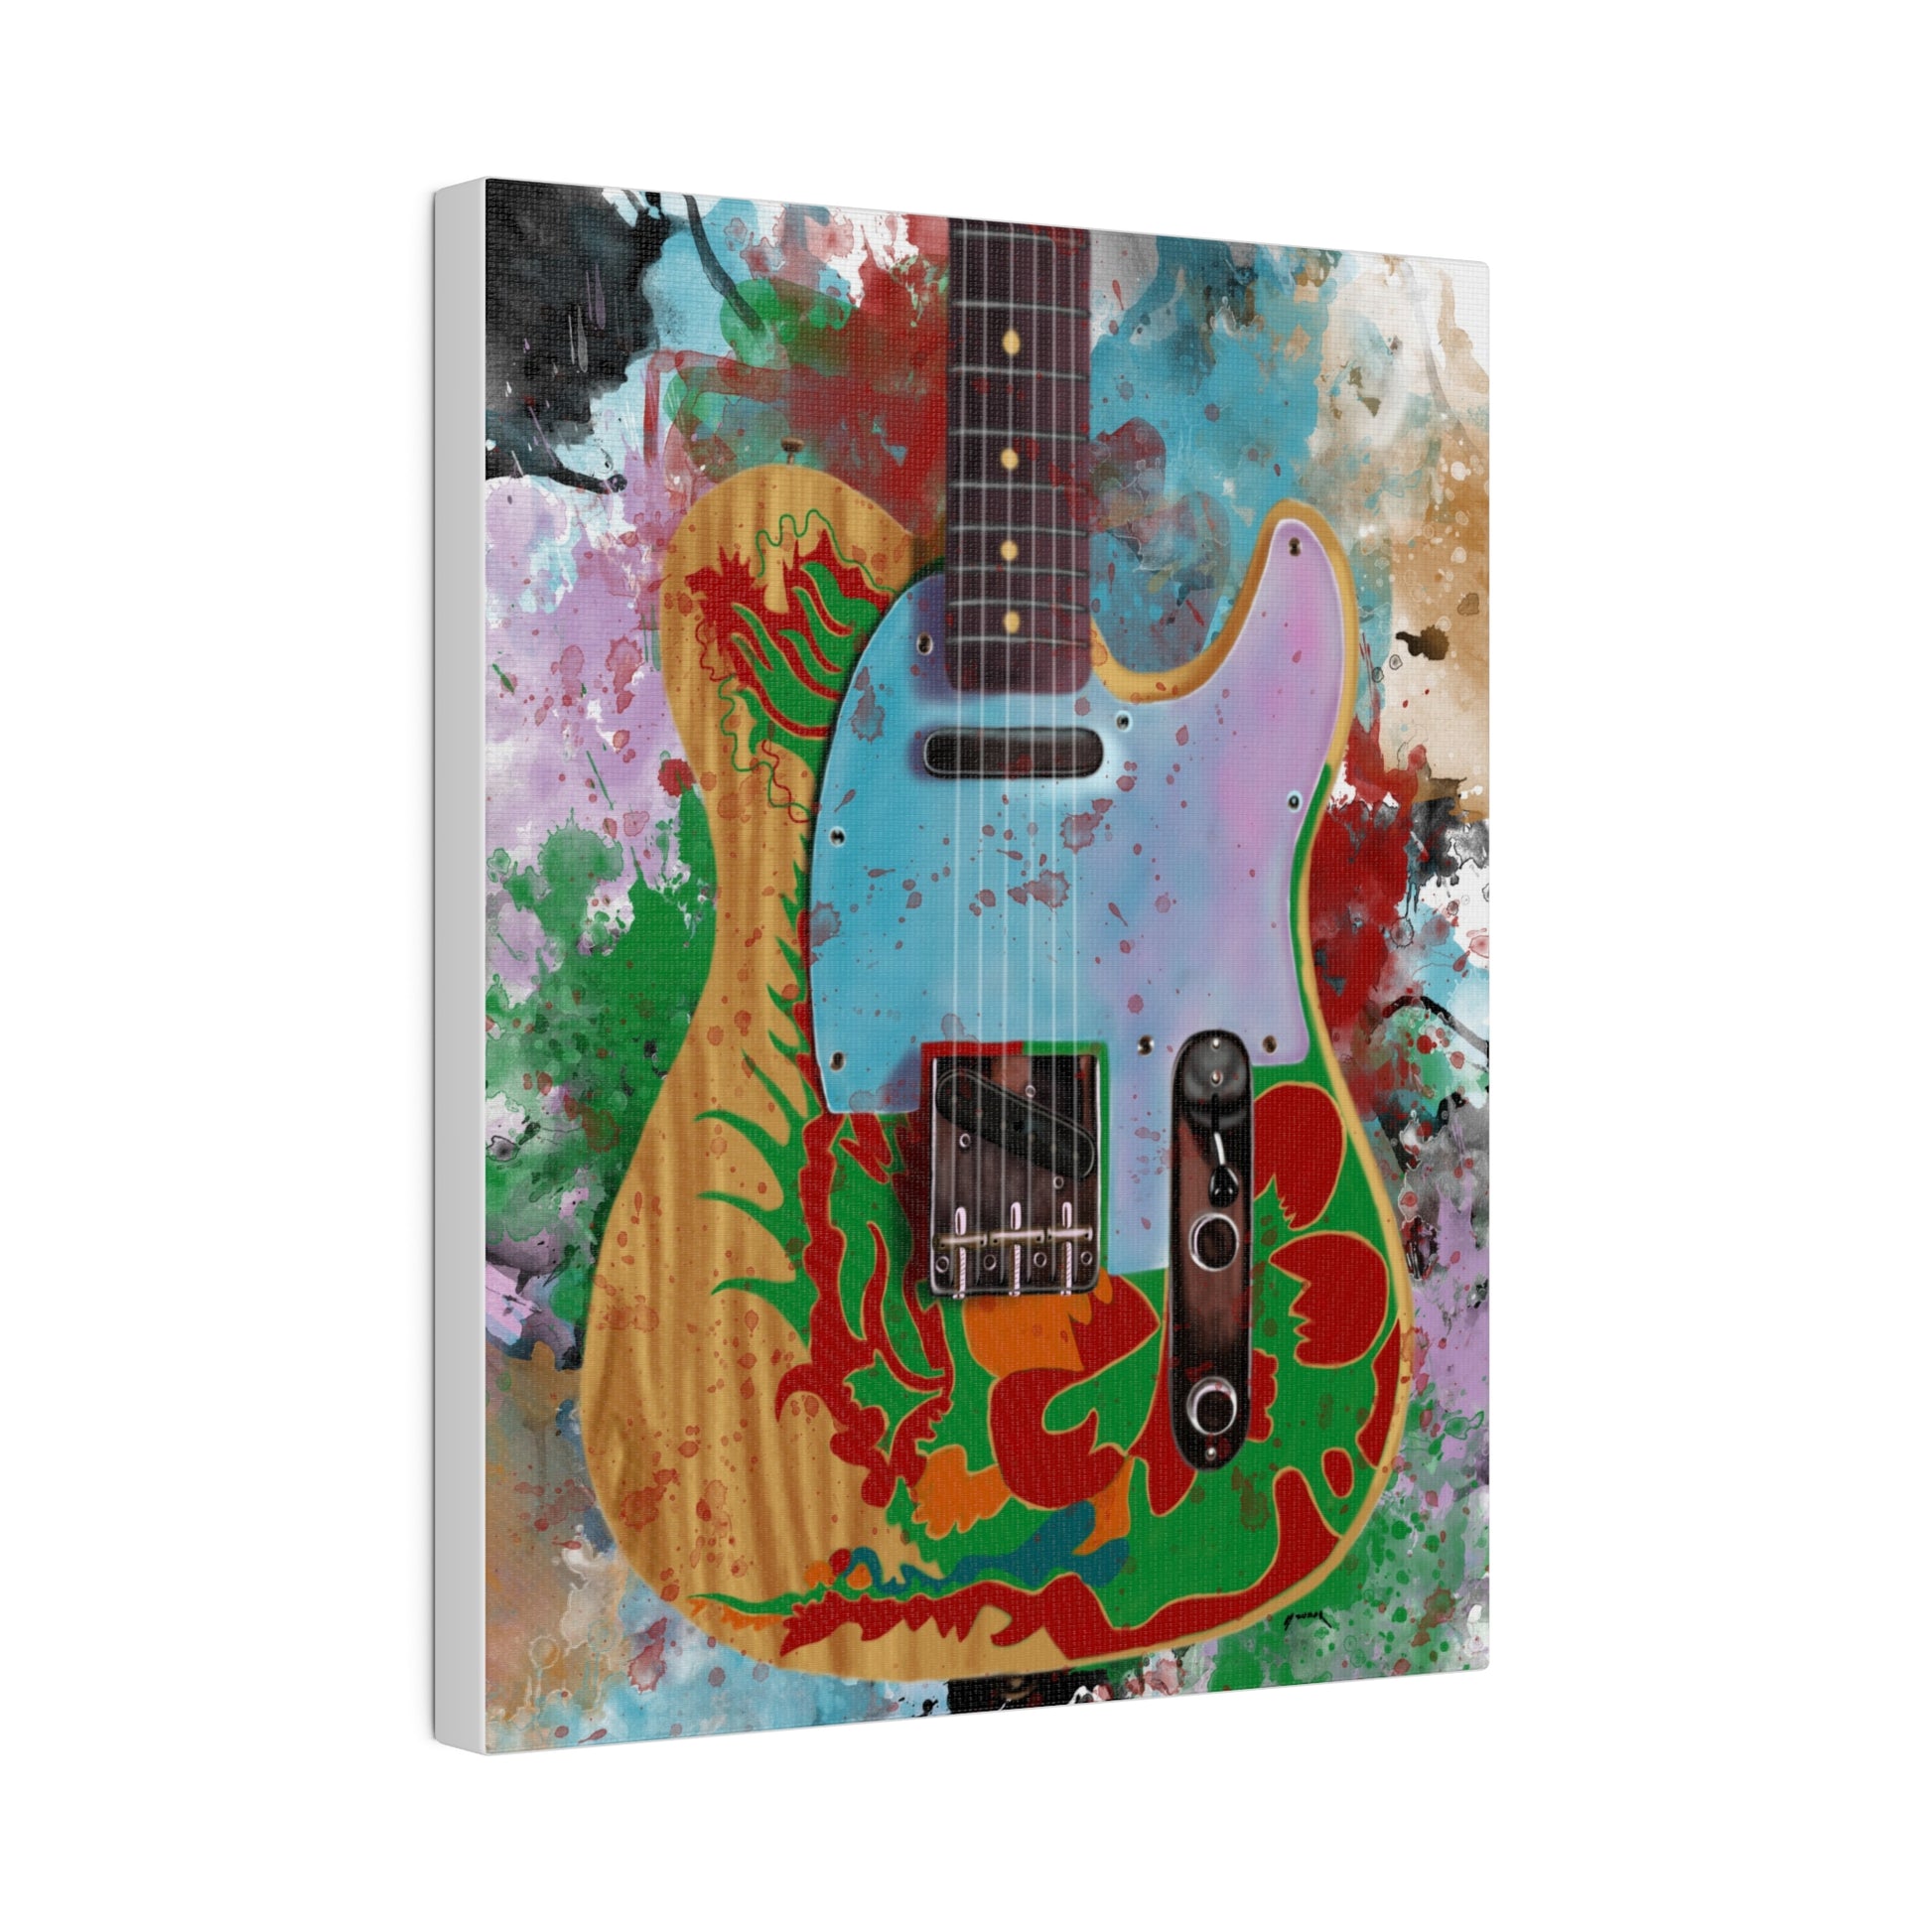 Digital painting of Jimmy's electric guitar printed on canvas